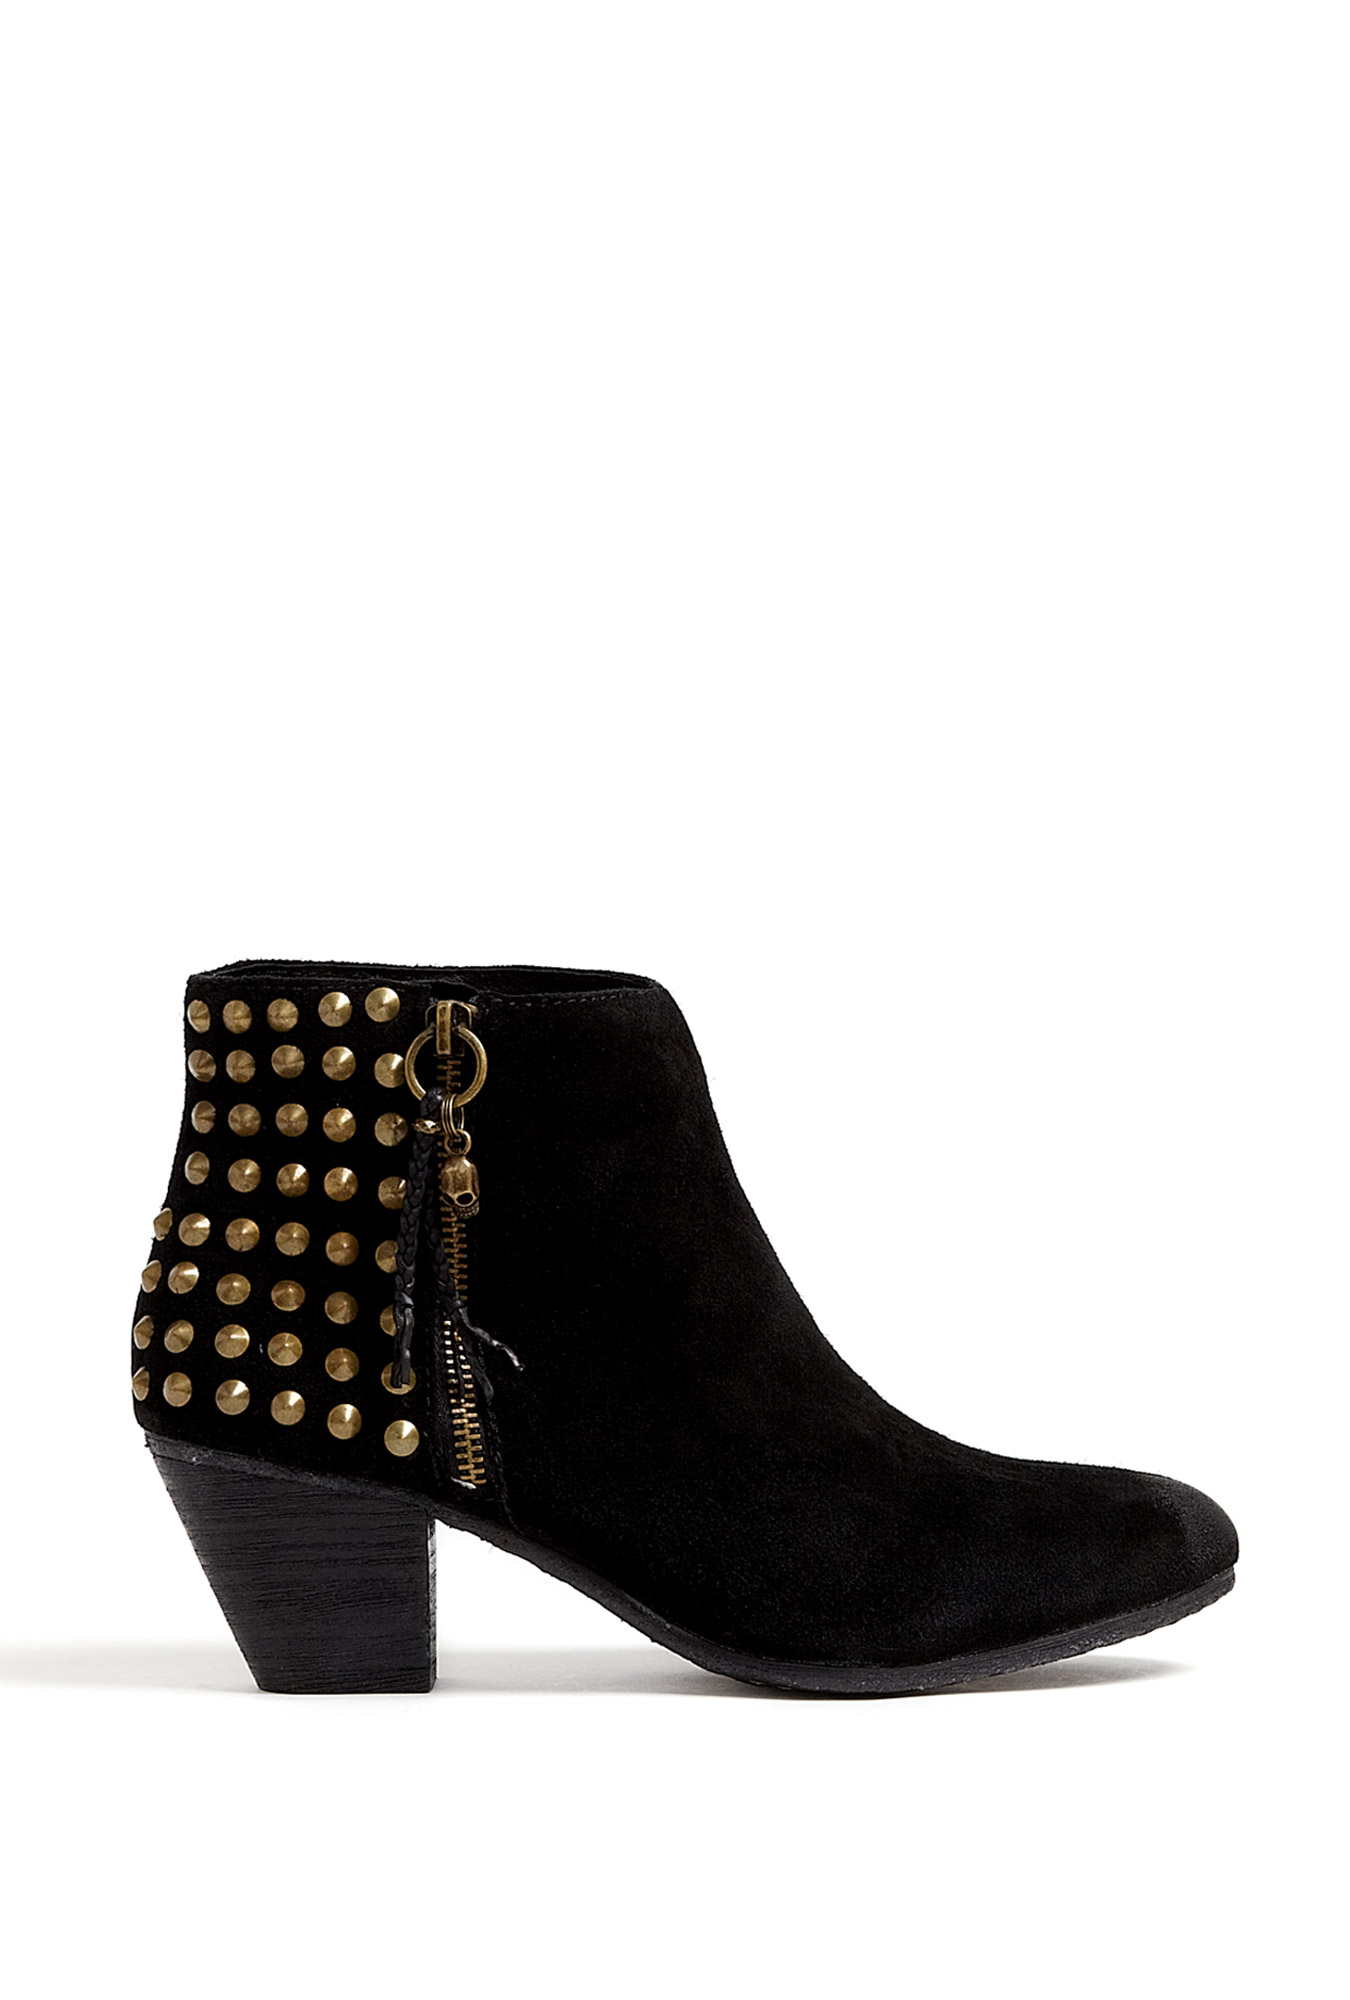 Ash Black Nevada Suede Studded Ankle Boot in Black | Lyst